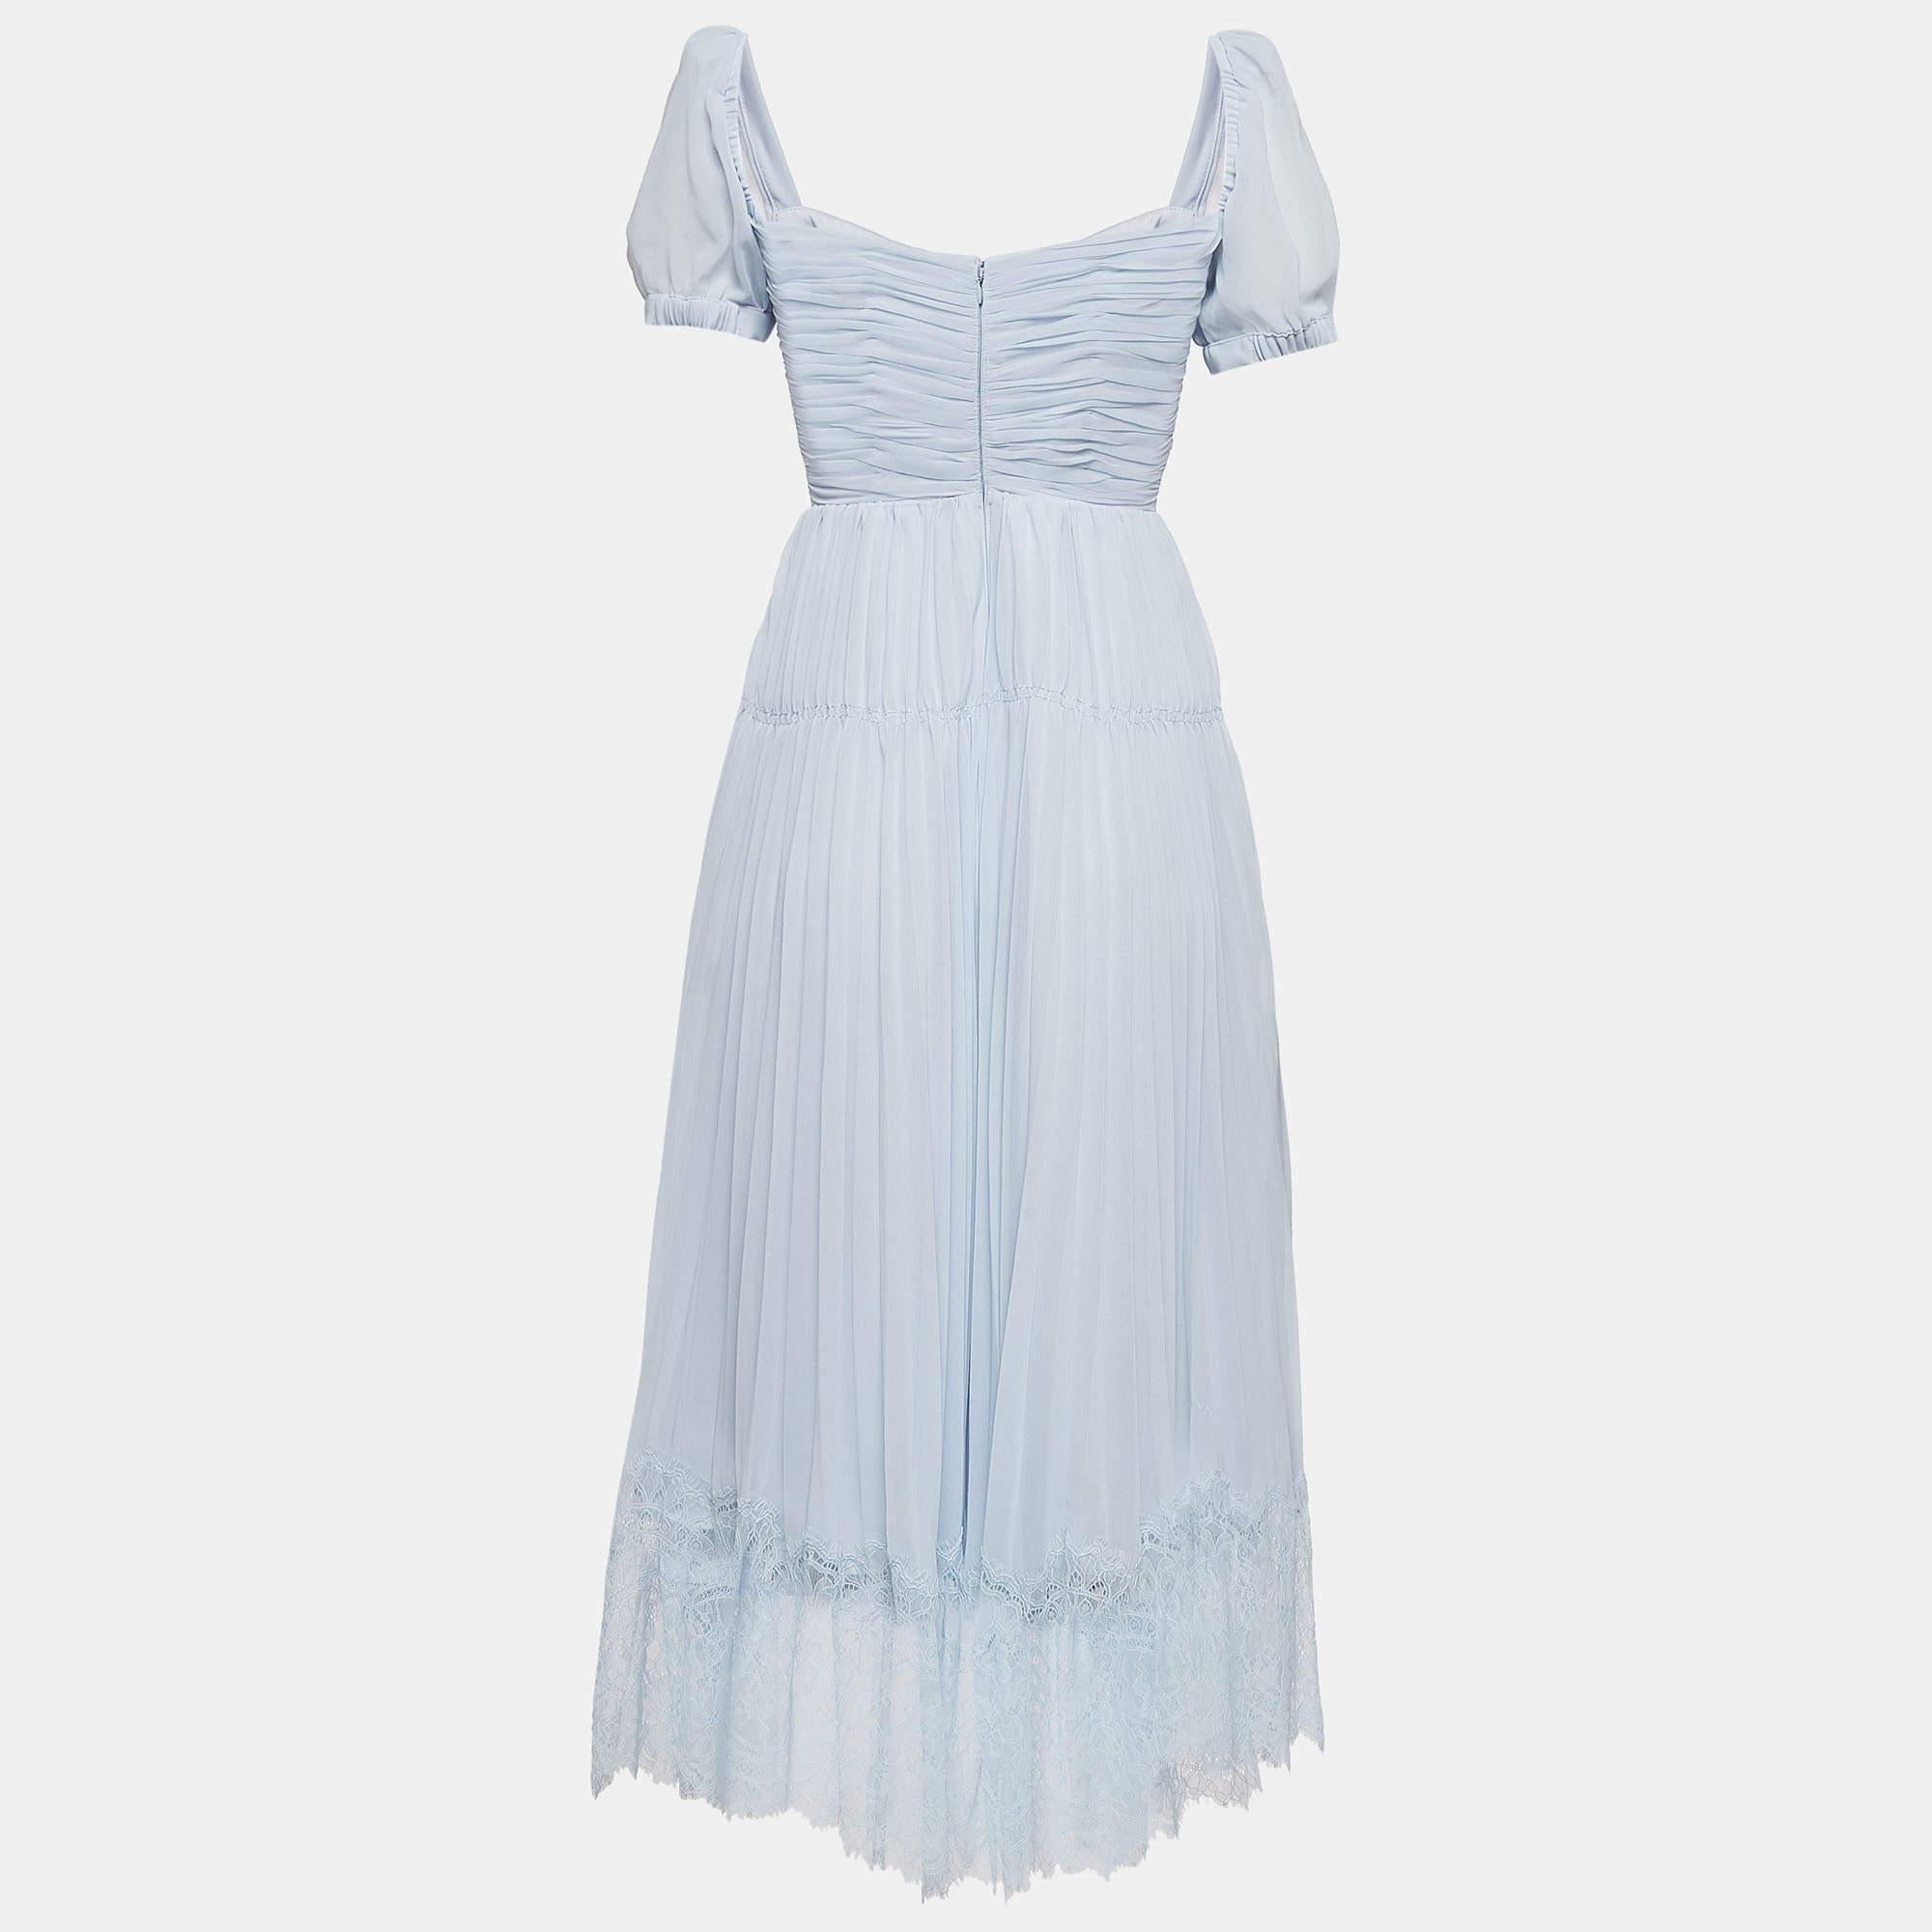 This Self-Portrait dress exudes elegance with its light blue hue and pleated chiffon fabric. The midi length adds sophistication while the cut-out details offer a hint of allure. Perfect for a romantic evening or a special occasion, it effortlessly